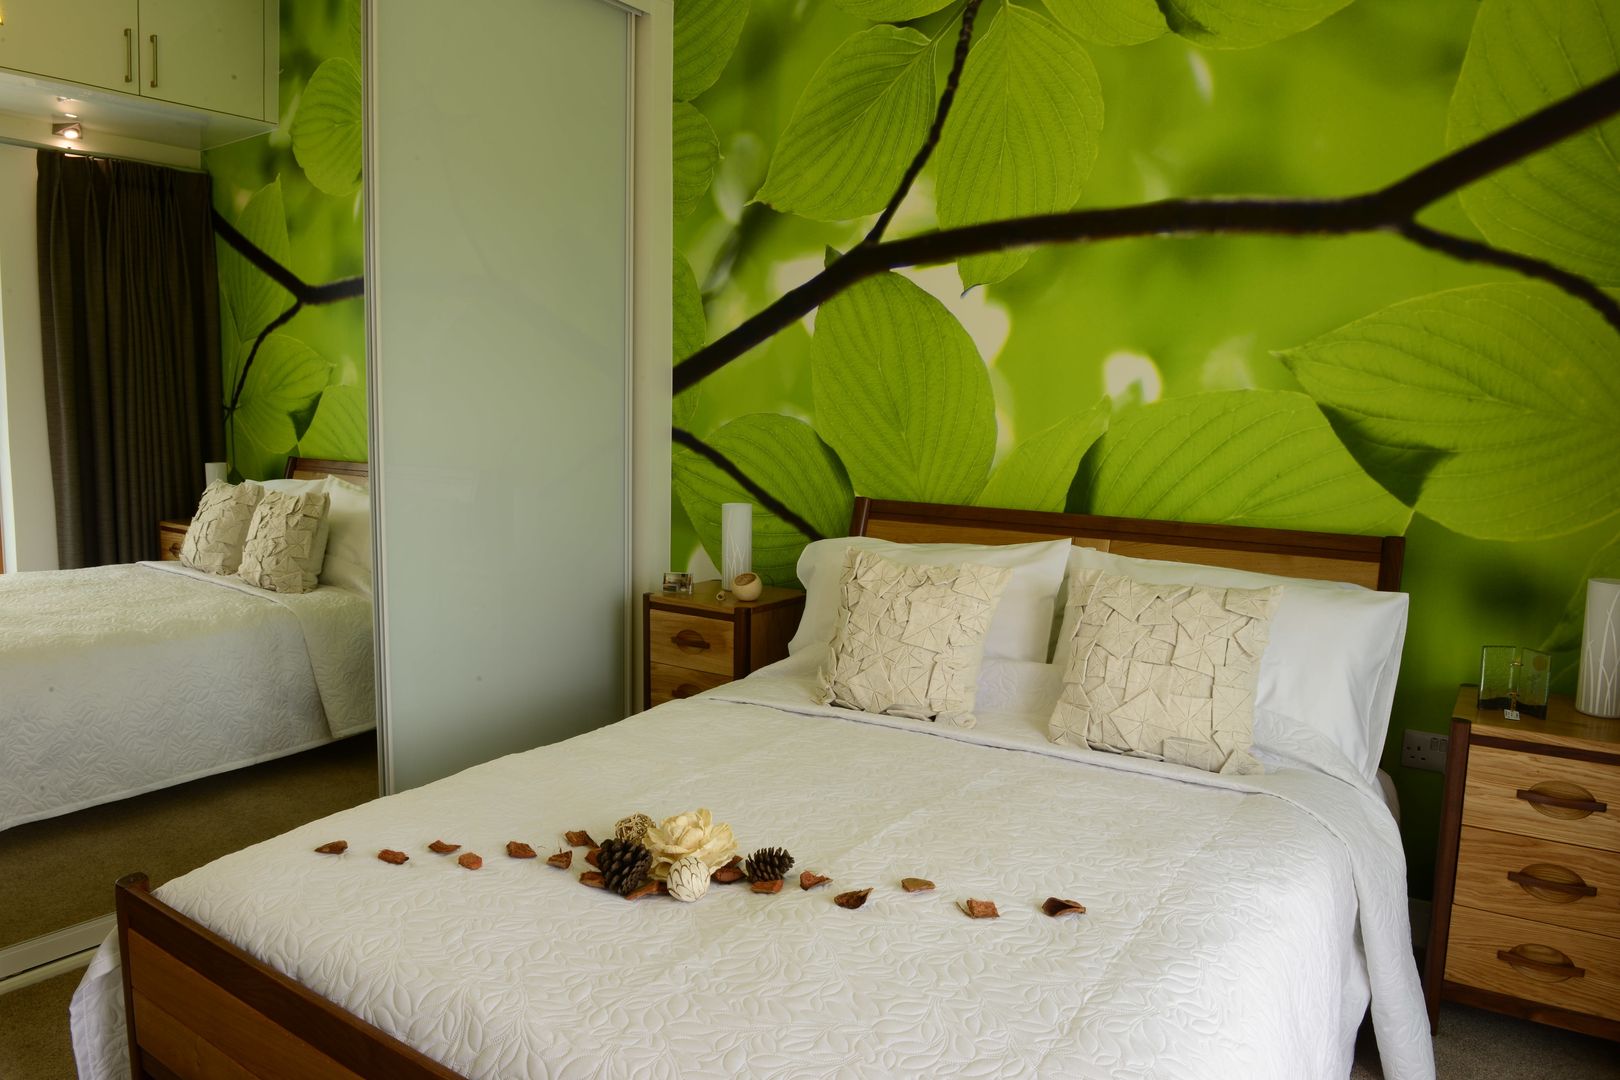 Green and white leaf mural bedroom KAS Interior Design モダンスタイルの寝室